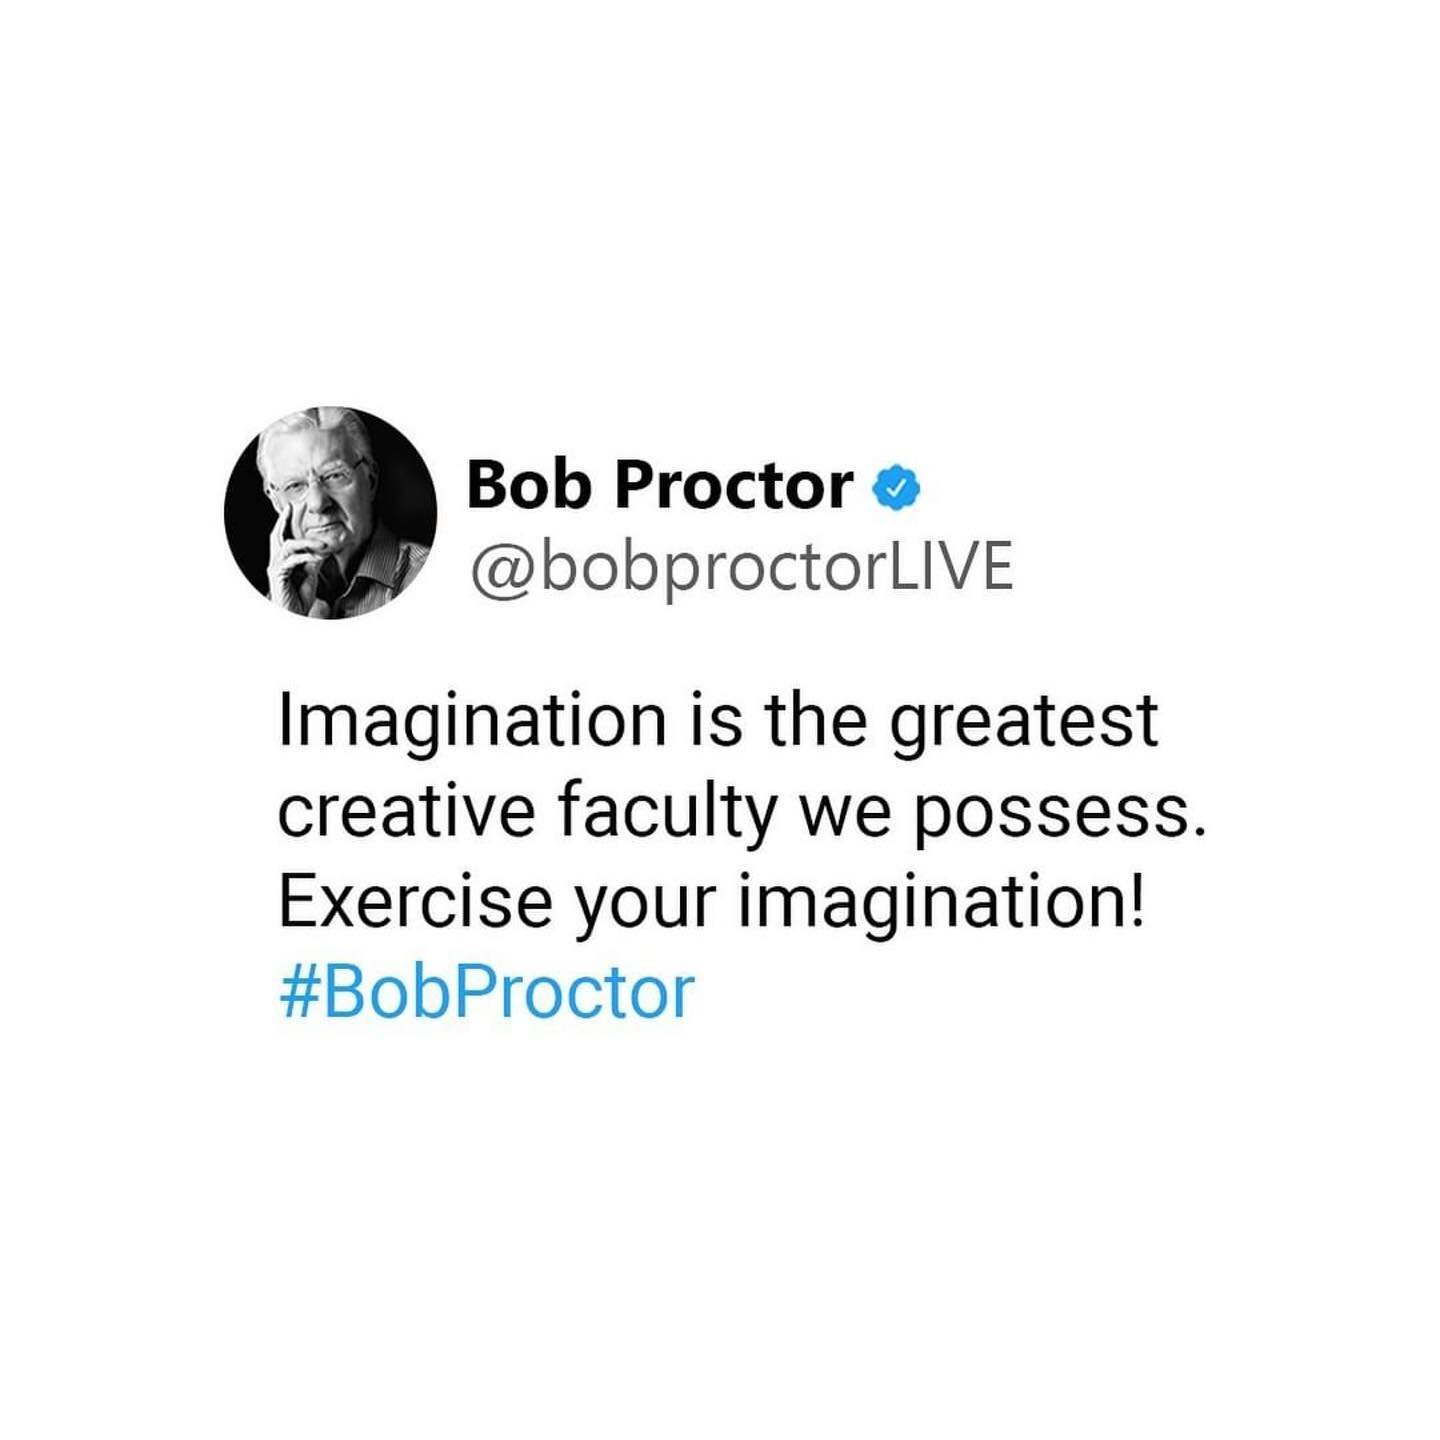 R.I.P. #BobProctor

We&rsquo;ll continue to imagine you sitting at the board room table. Looking forward to having you guide our decision making from the other side 

✌️